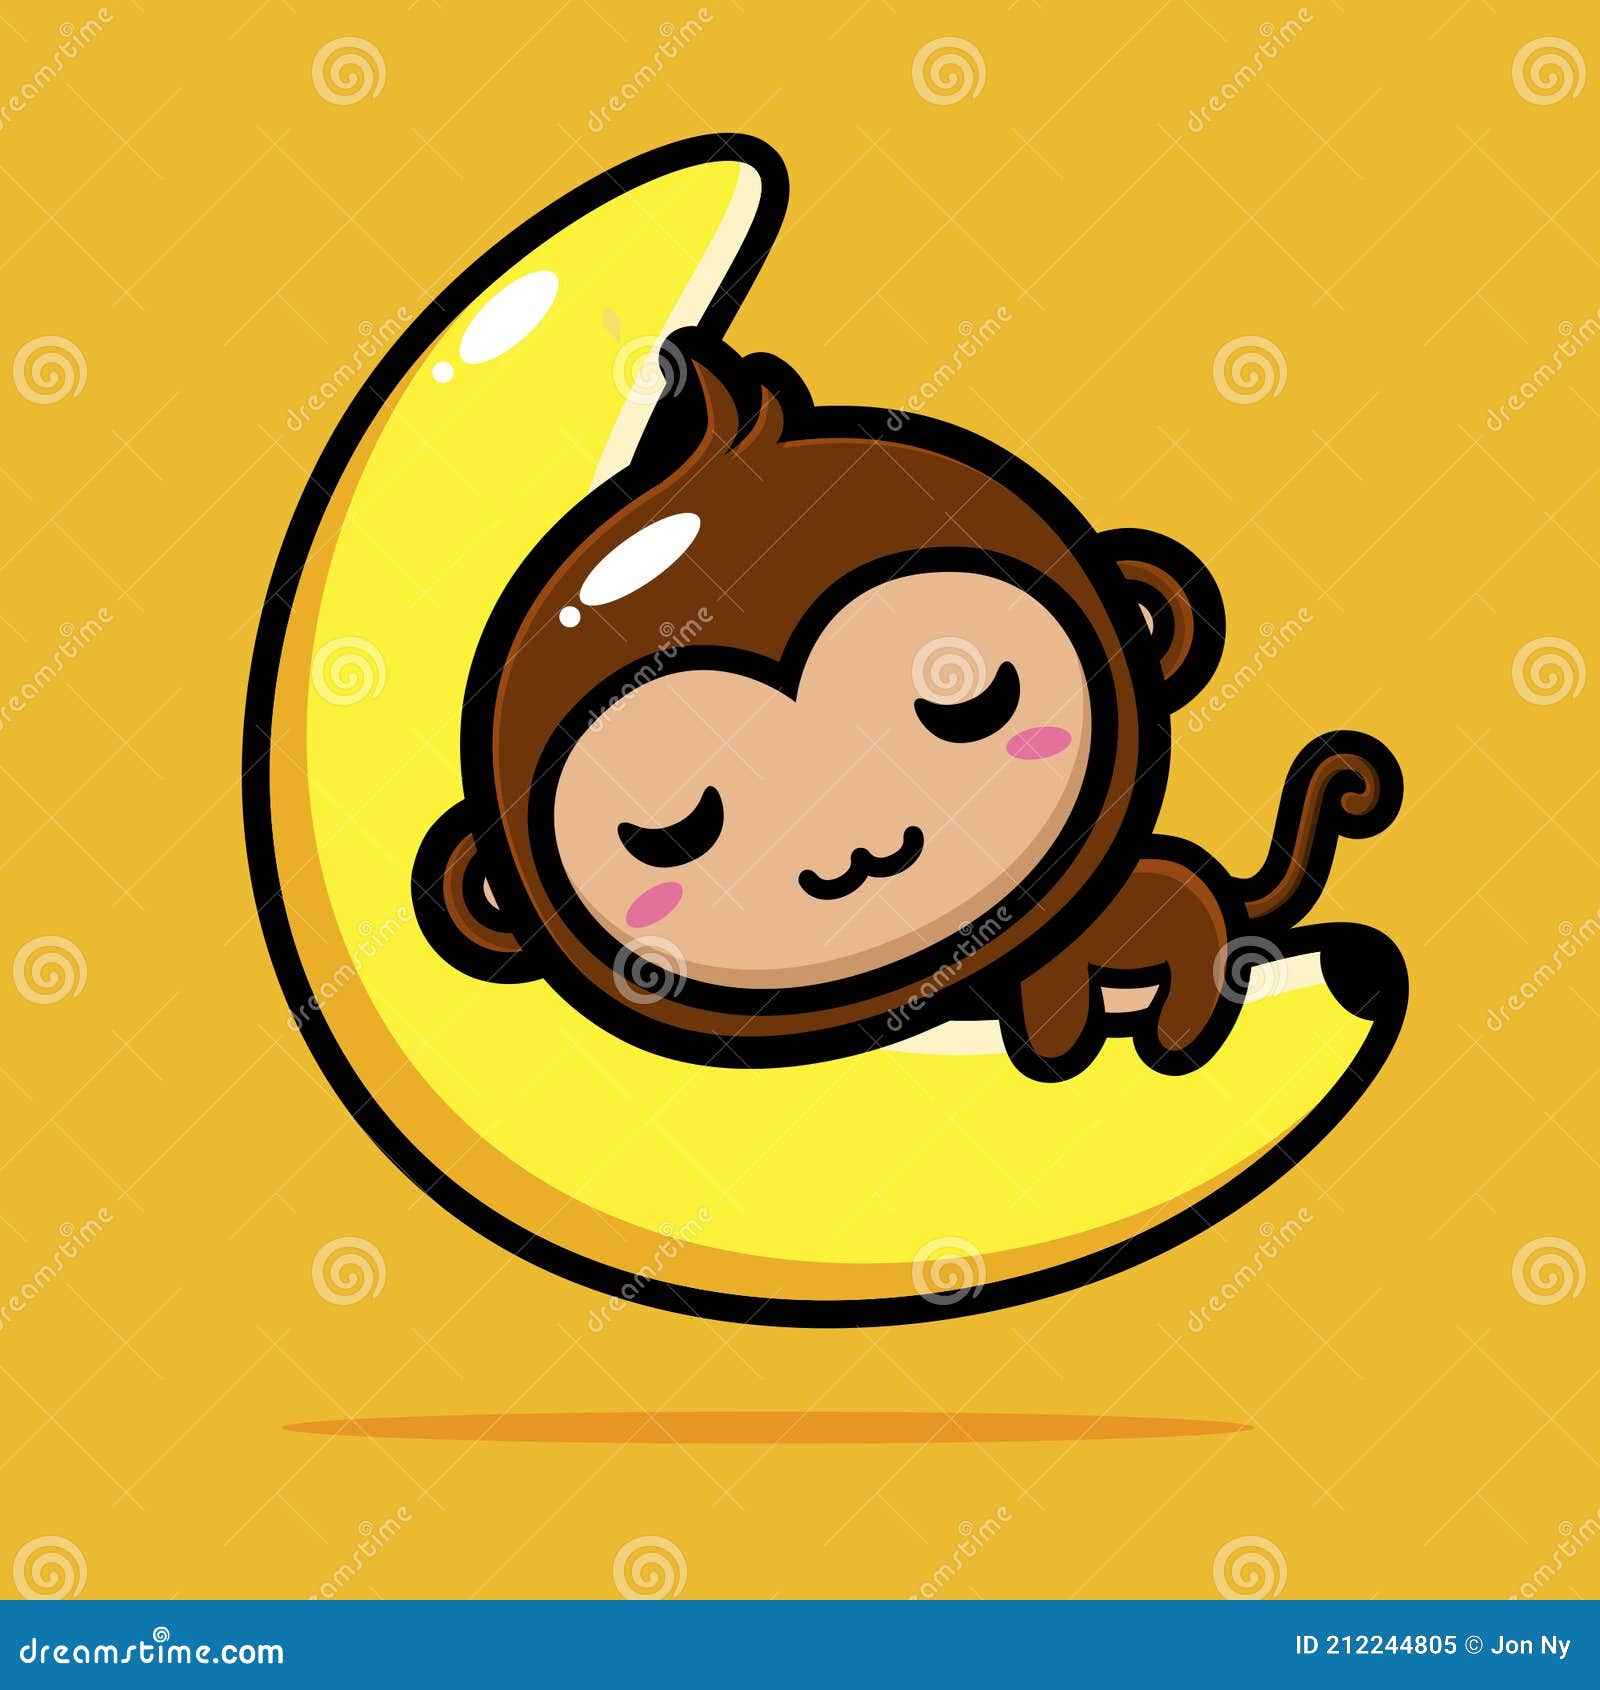 Cute Monkey Animal Cartoon Characters are Sleeping and Hugging a Crescent  Moon in the Shape of a Banana Stock Vector - Illustration of cheer,  crescent: 212244805